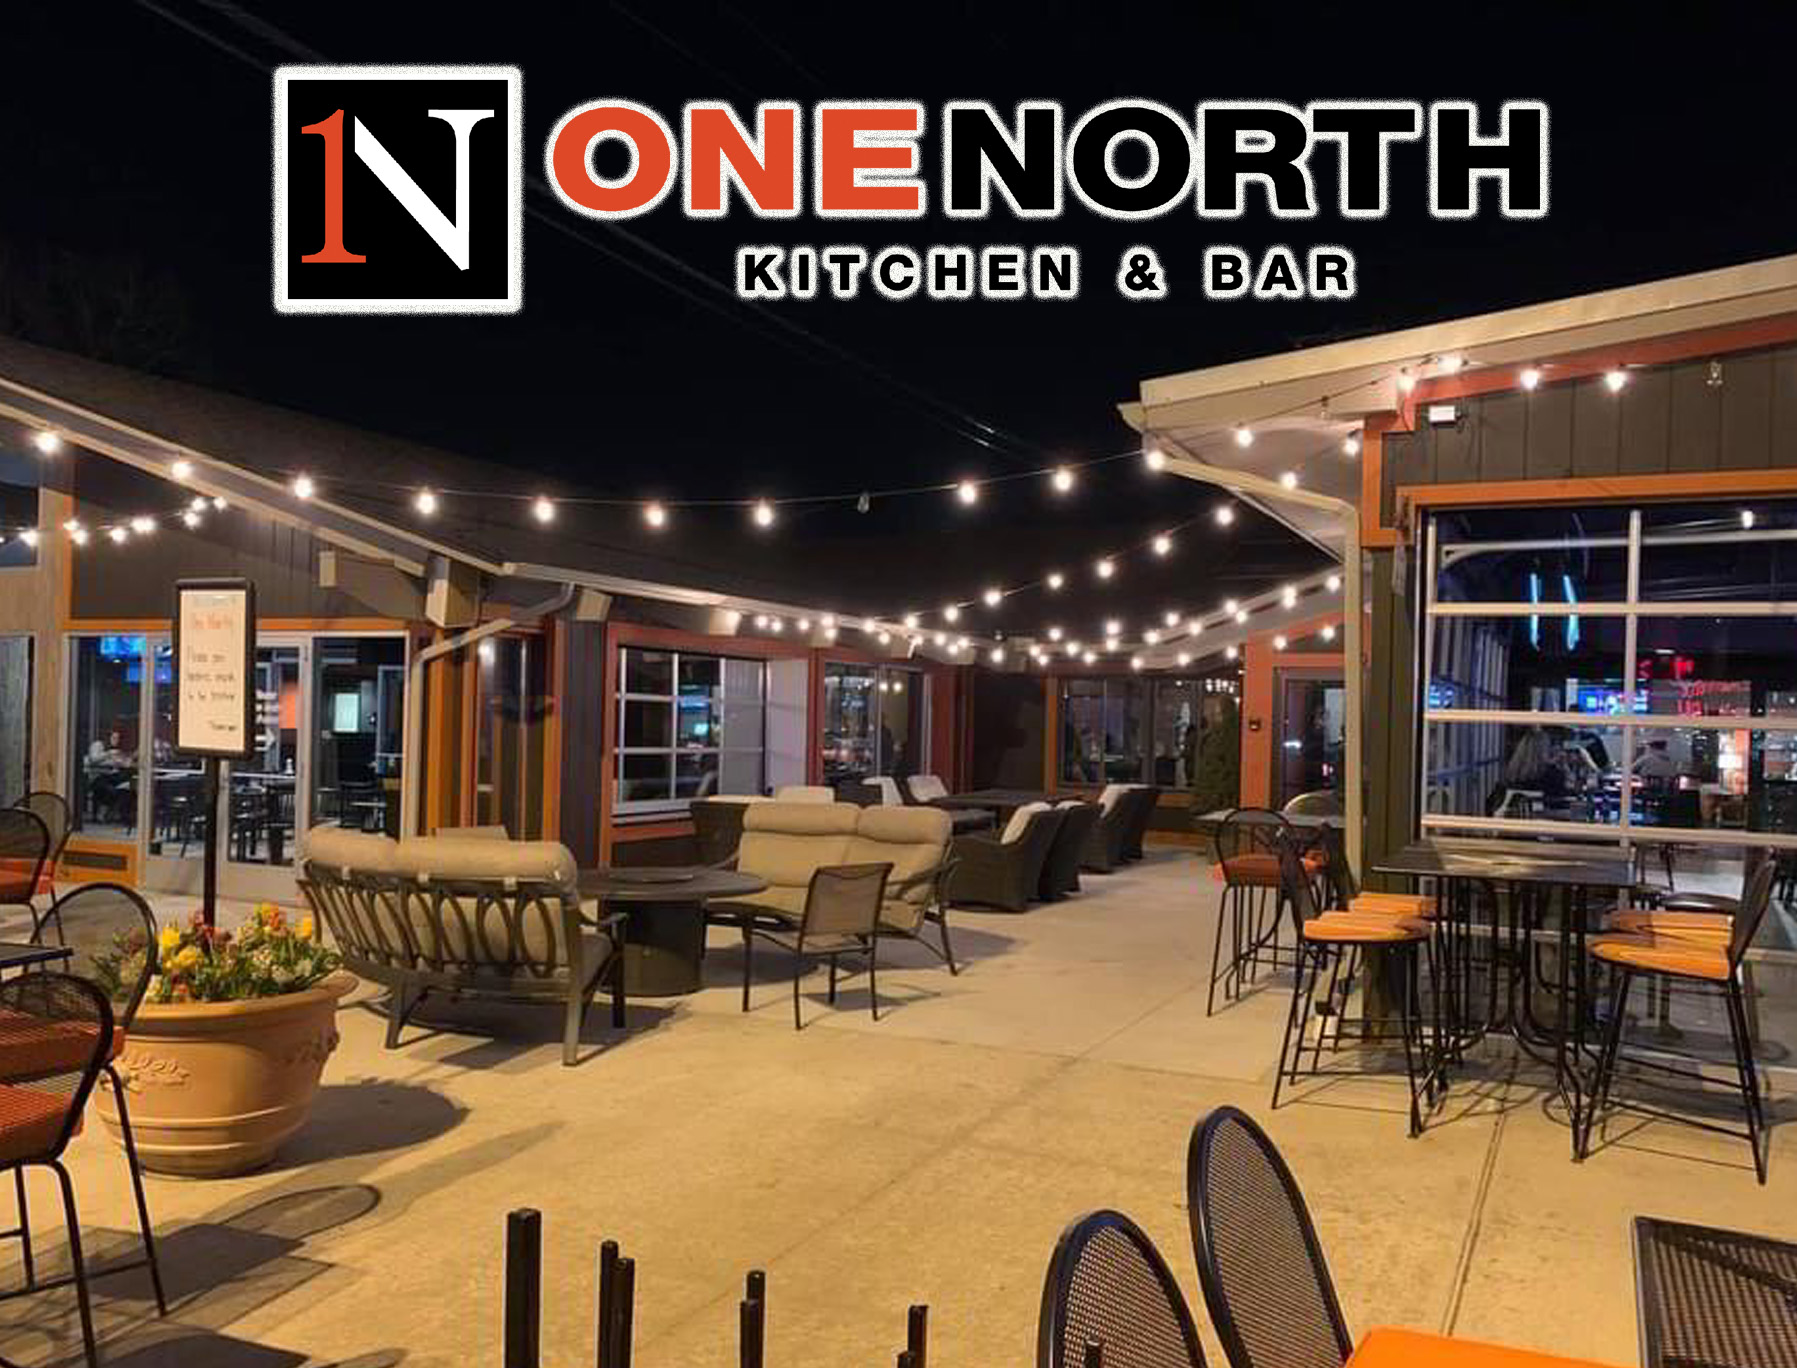 One north kitchen and bar